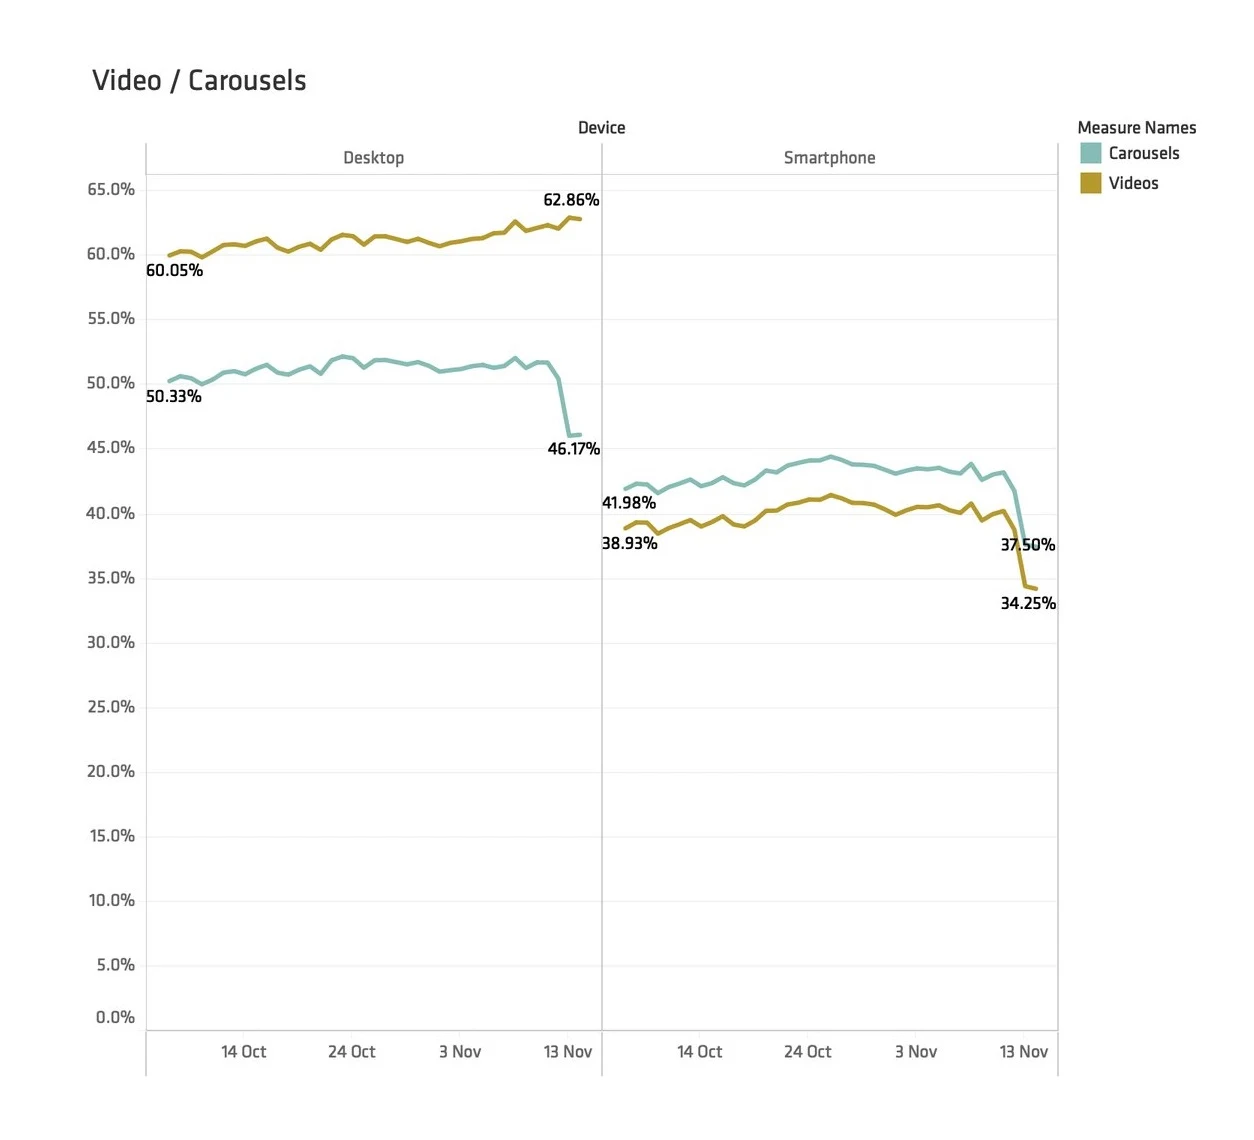 More video movement on the SERPs. It looks like Google took away a good chunk of video carousels on the 13th across most markets. On desktop, single videos still remain, but on smartphone we're seeing no replacement.